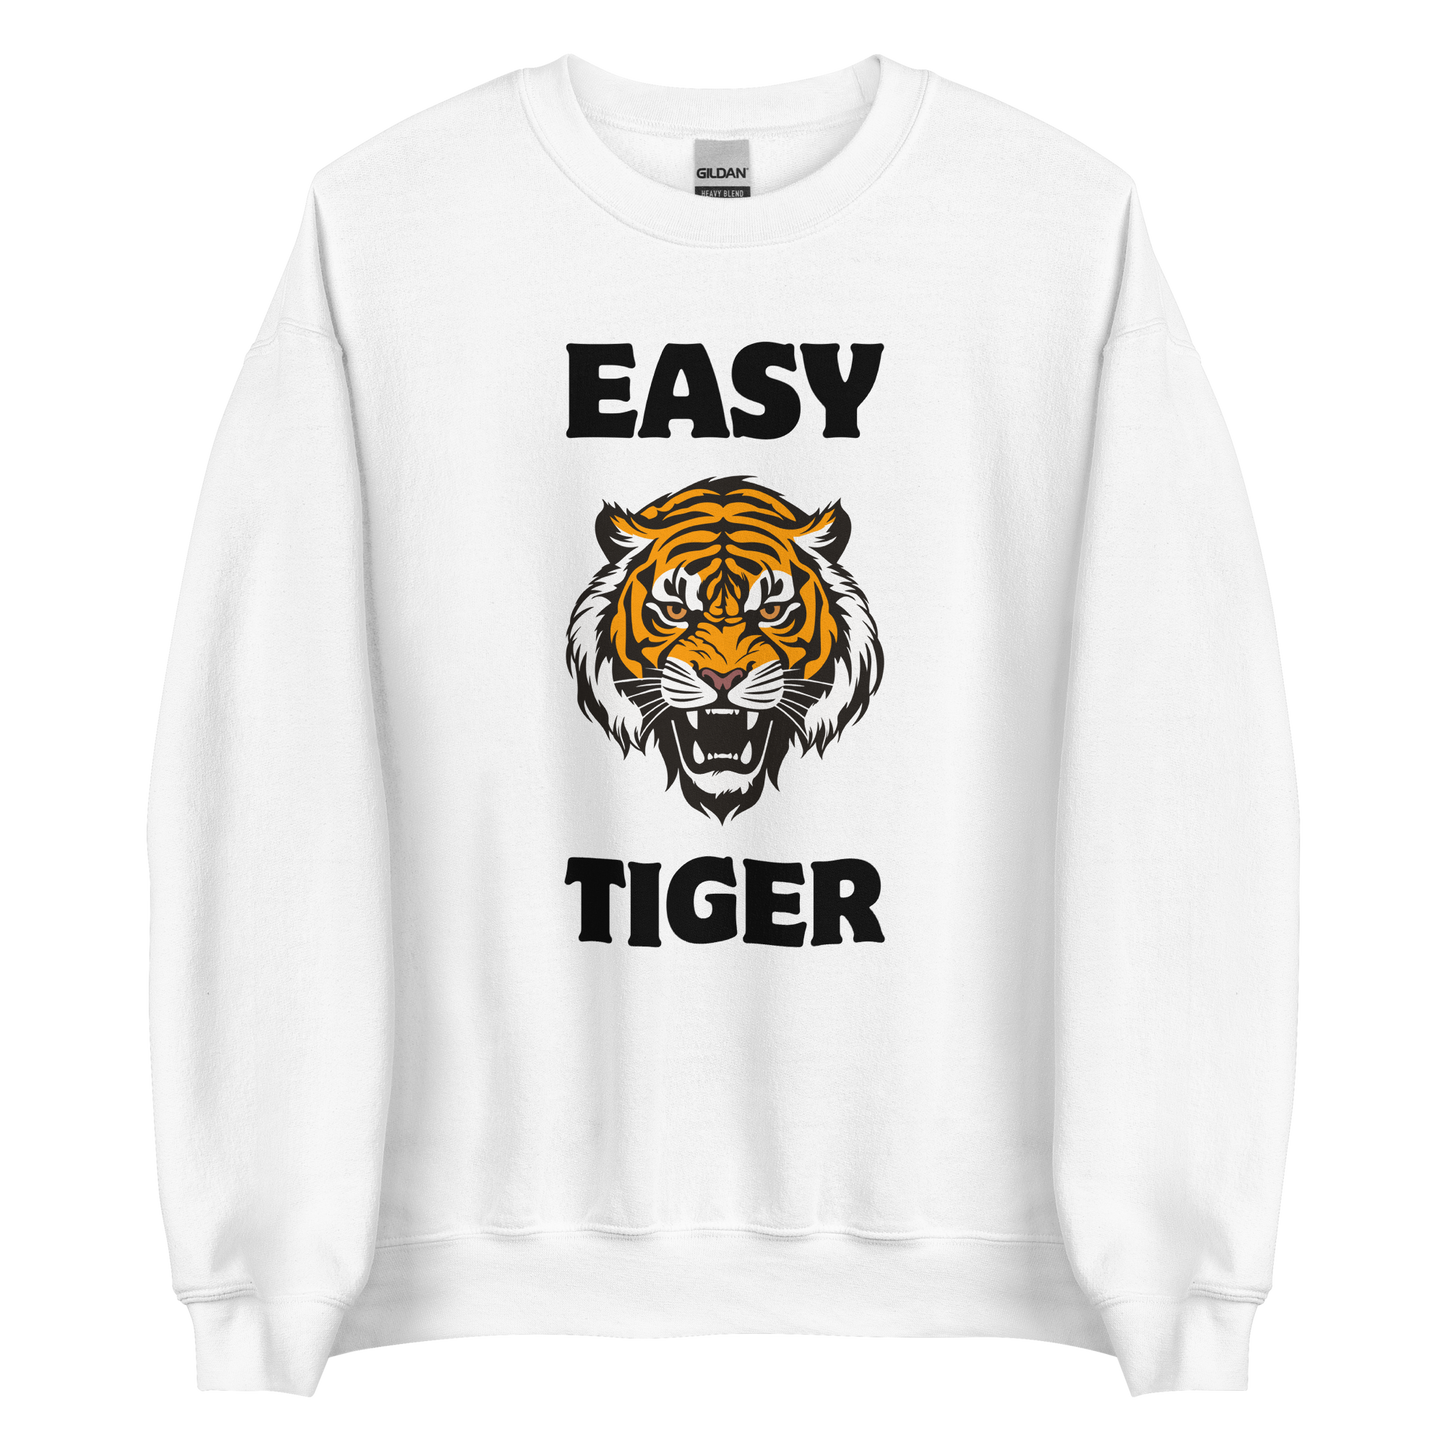 White Tiger Sweatshirt featuring a Easy Tiger graphic on the chest - Funny Graphic Tiger Sweatshirts - Boozy Fox